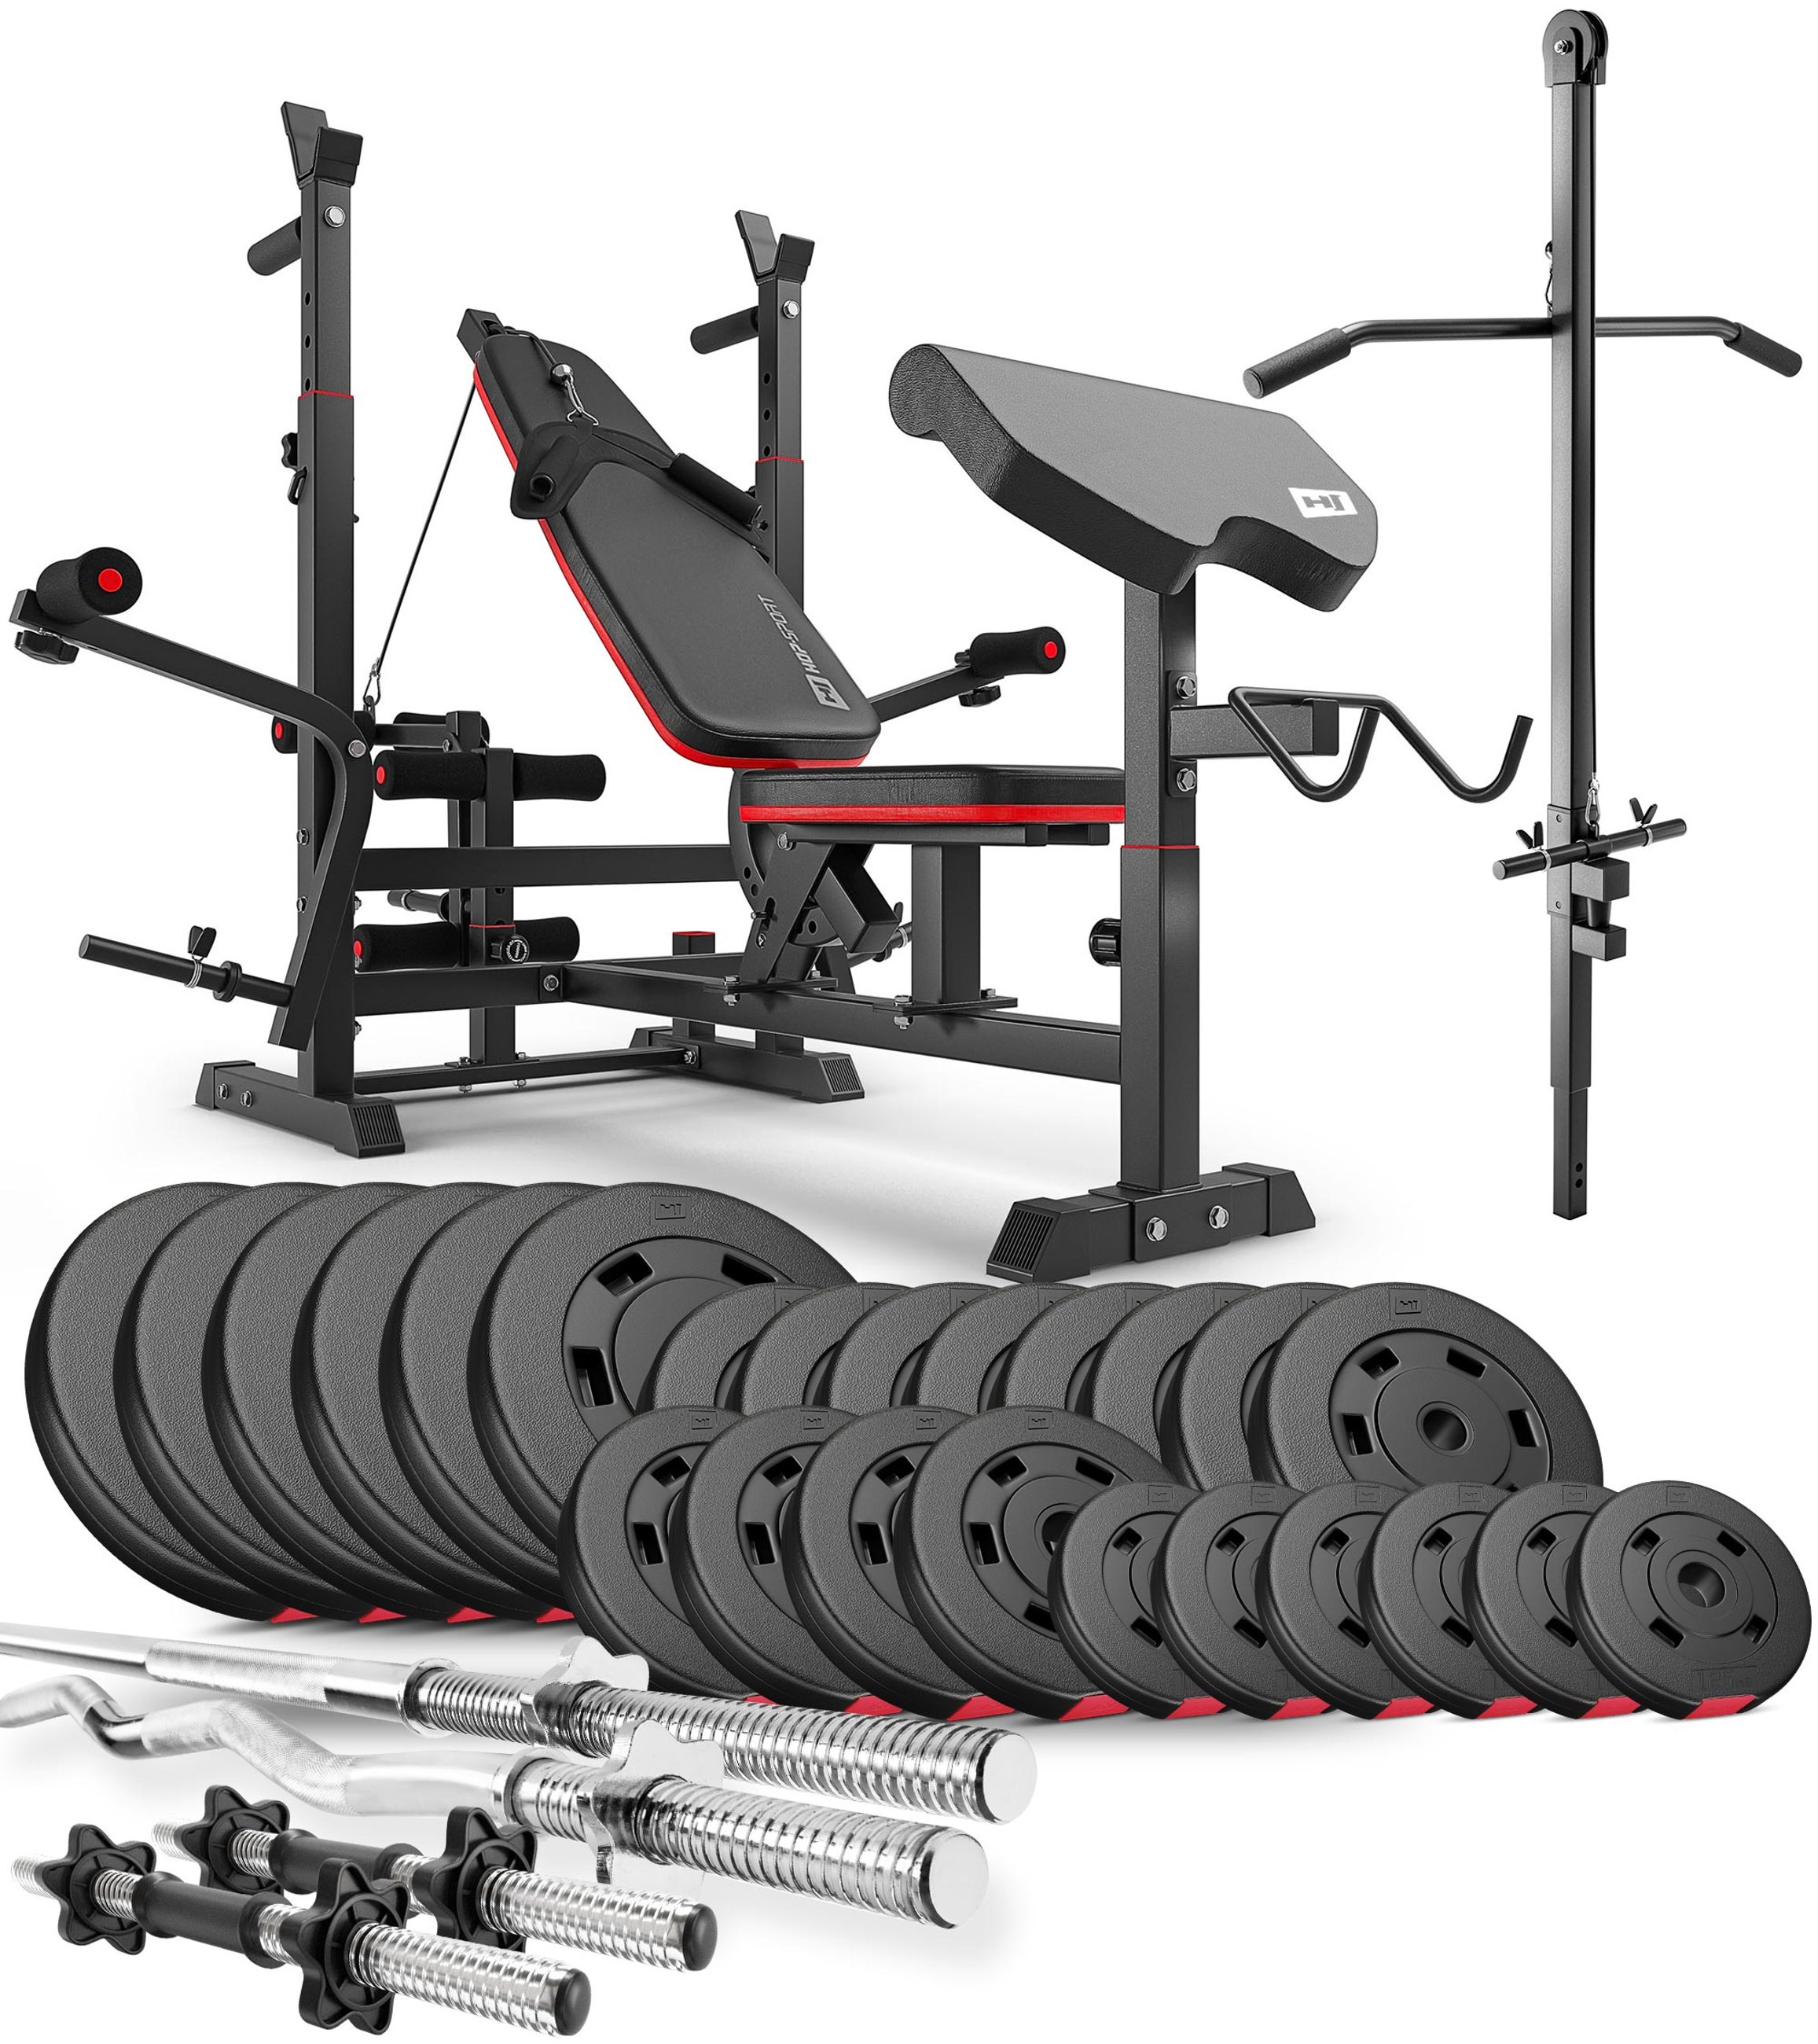 Premium 135 kg Barbell Set with HS-1075 Weight Bench